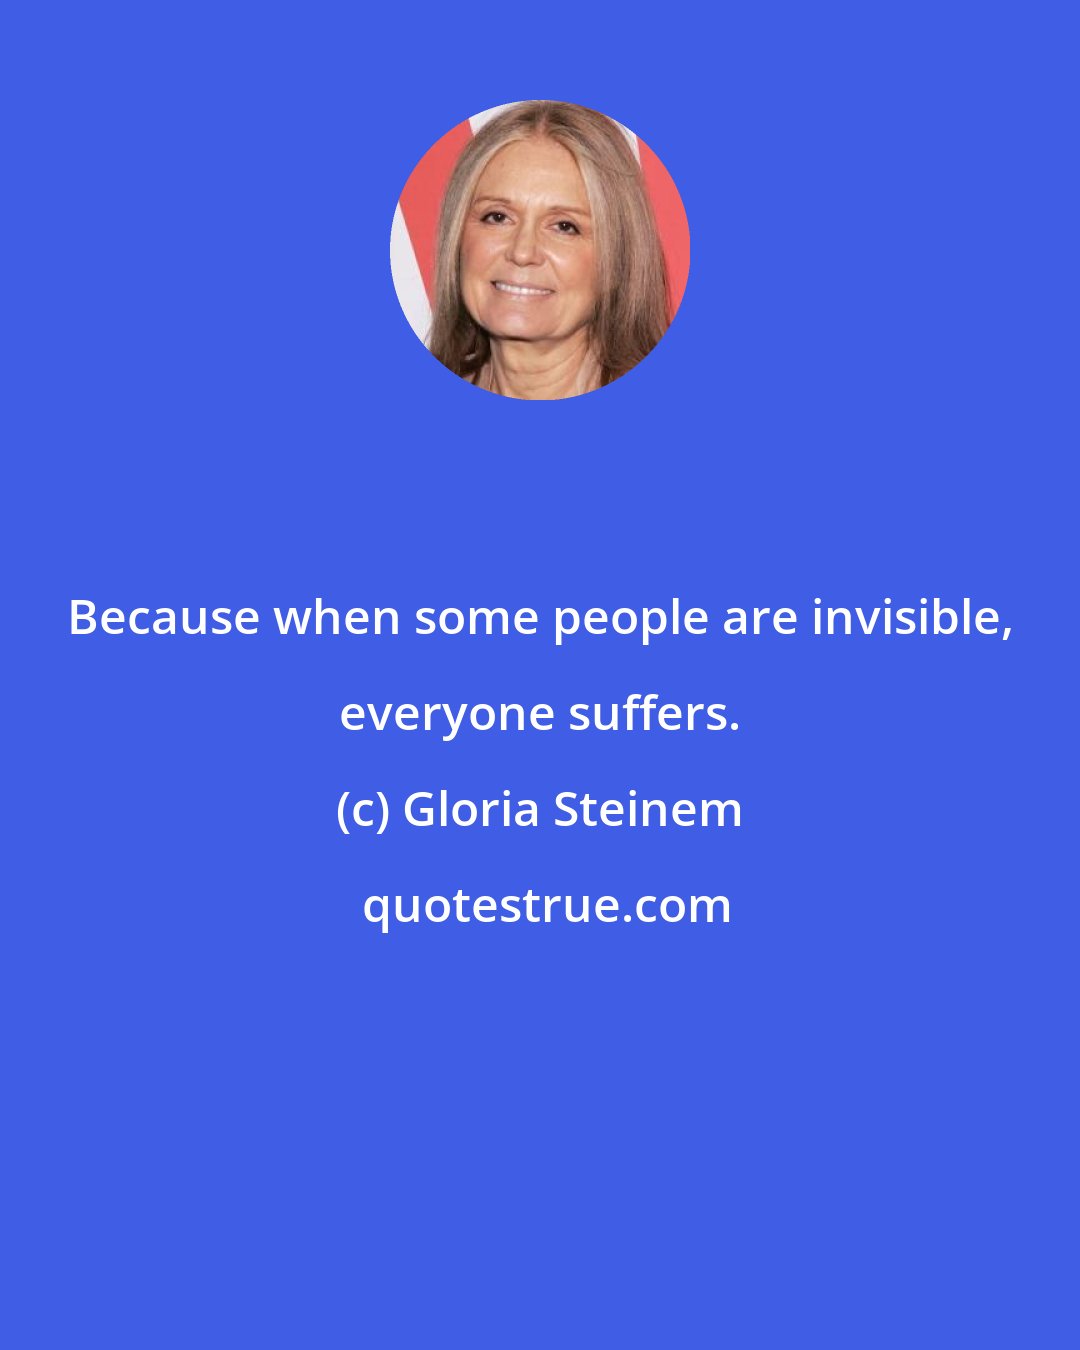 Gloria Steinem: Because when some people are invisible, everyone suffers.